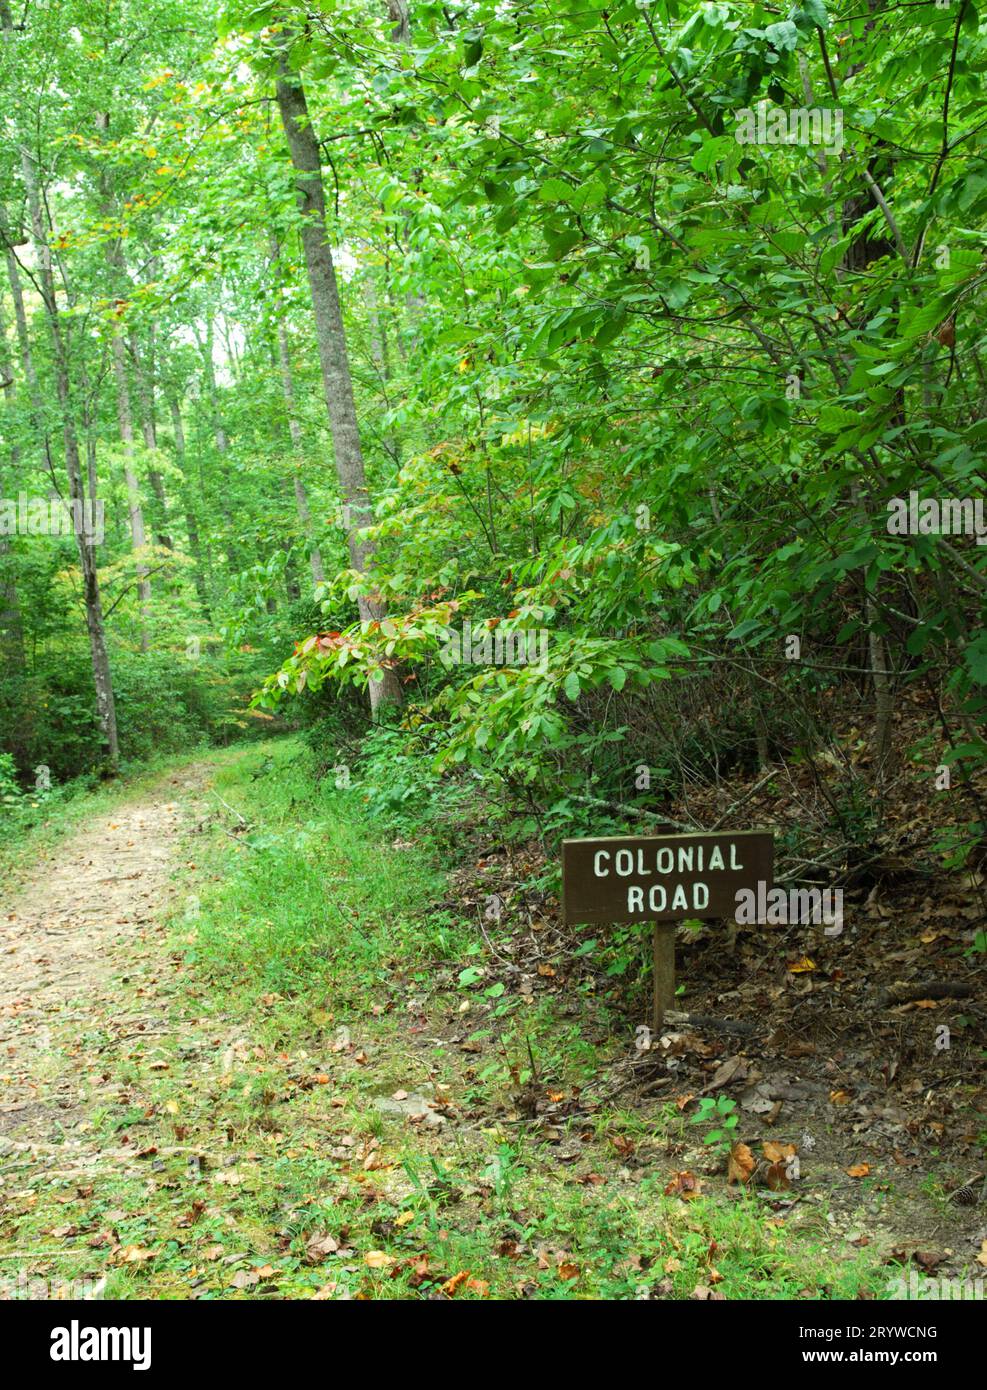 Photo shows Colonial Road sign beside hiking trail at the Kings Mountain National Military Park, South Carolina USA. Stock Photo